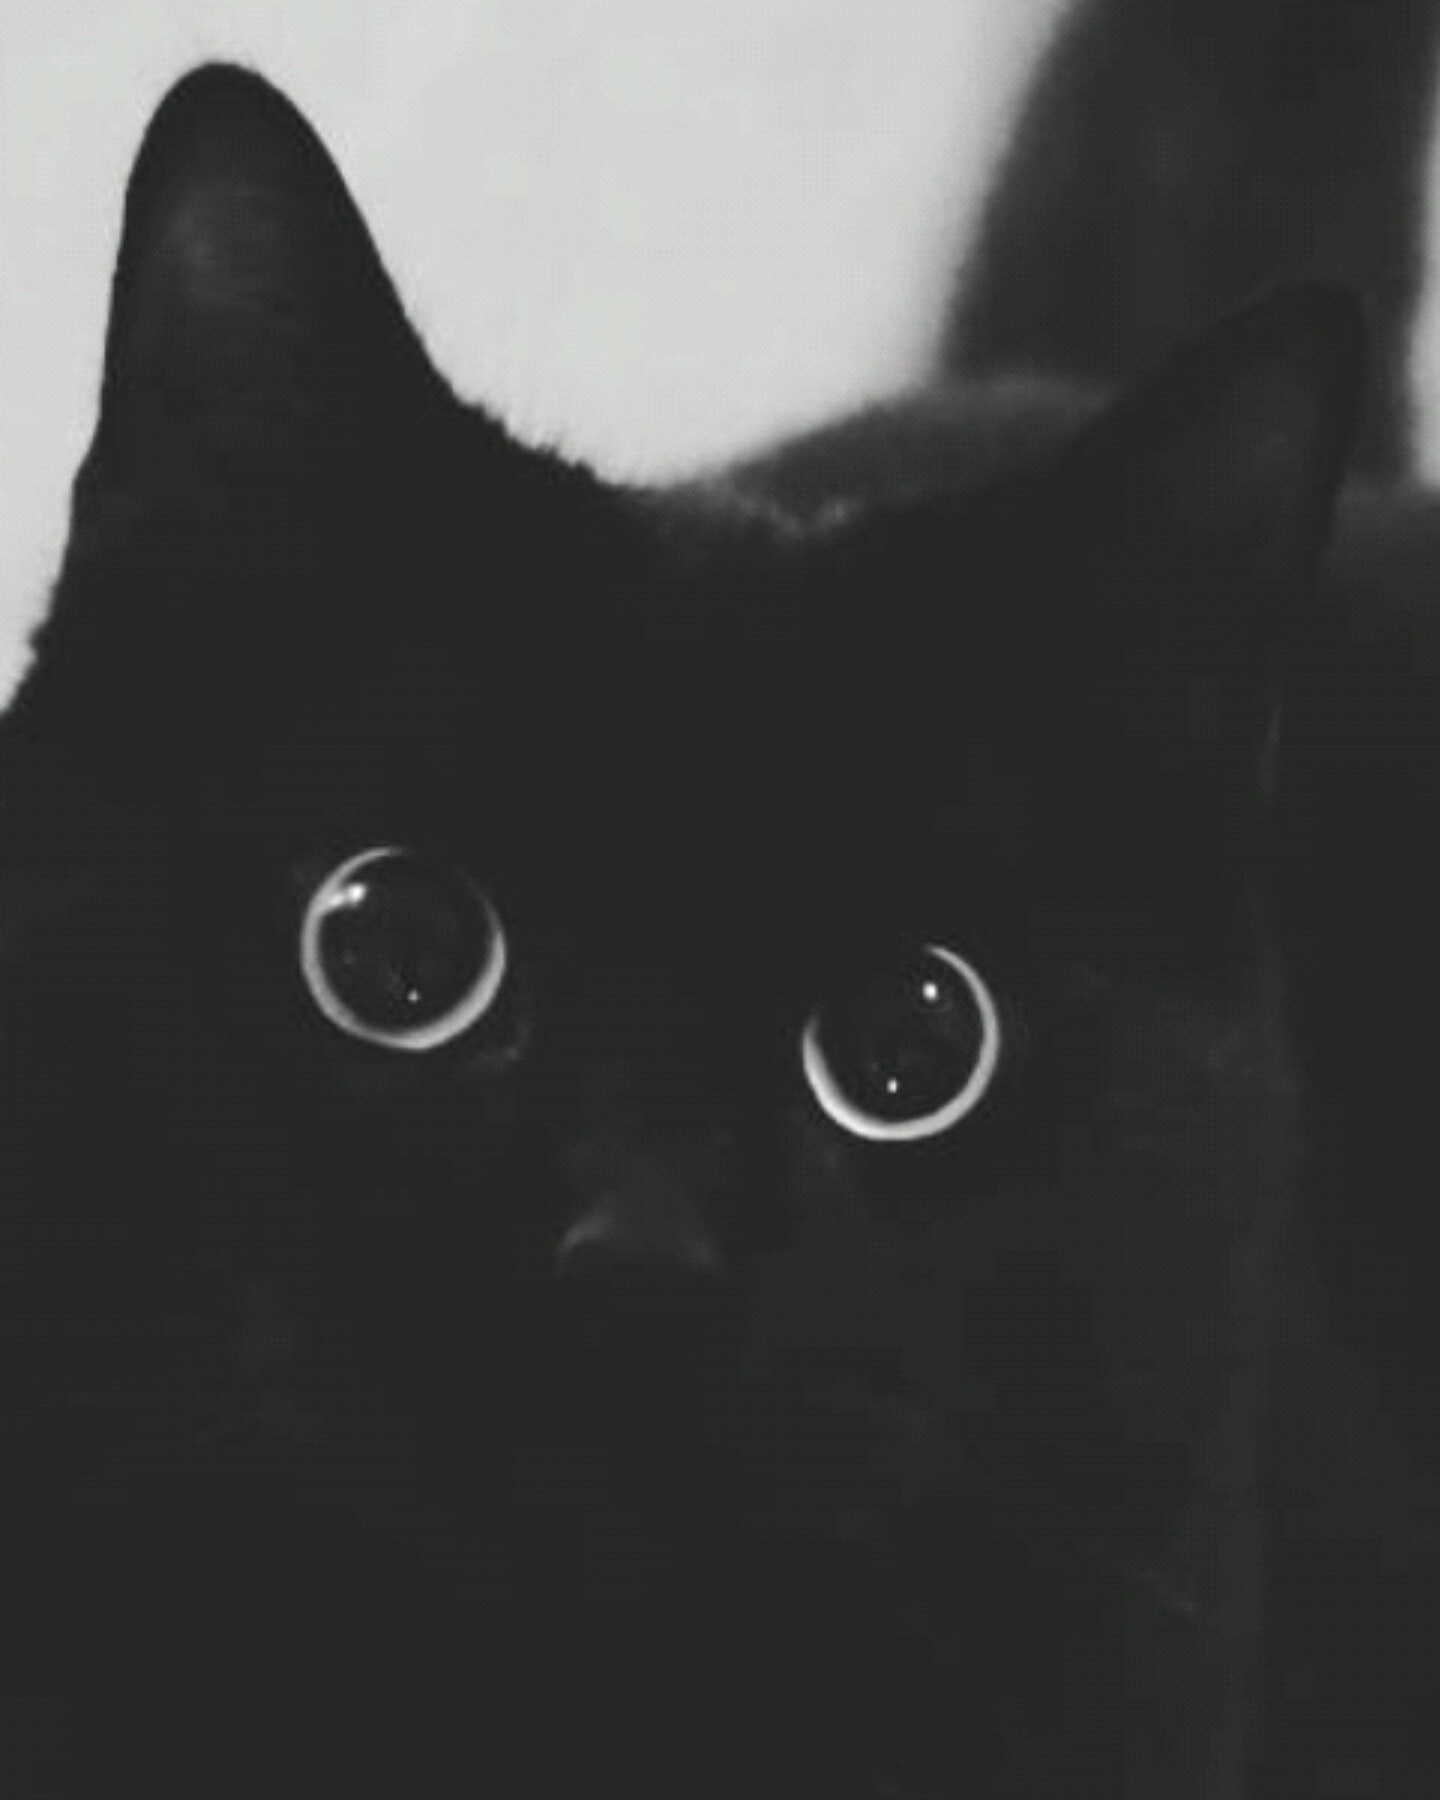 black cat with moon eyes